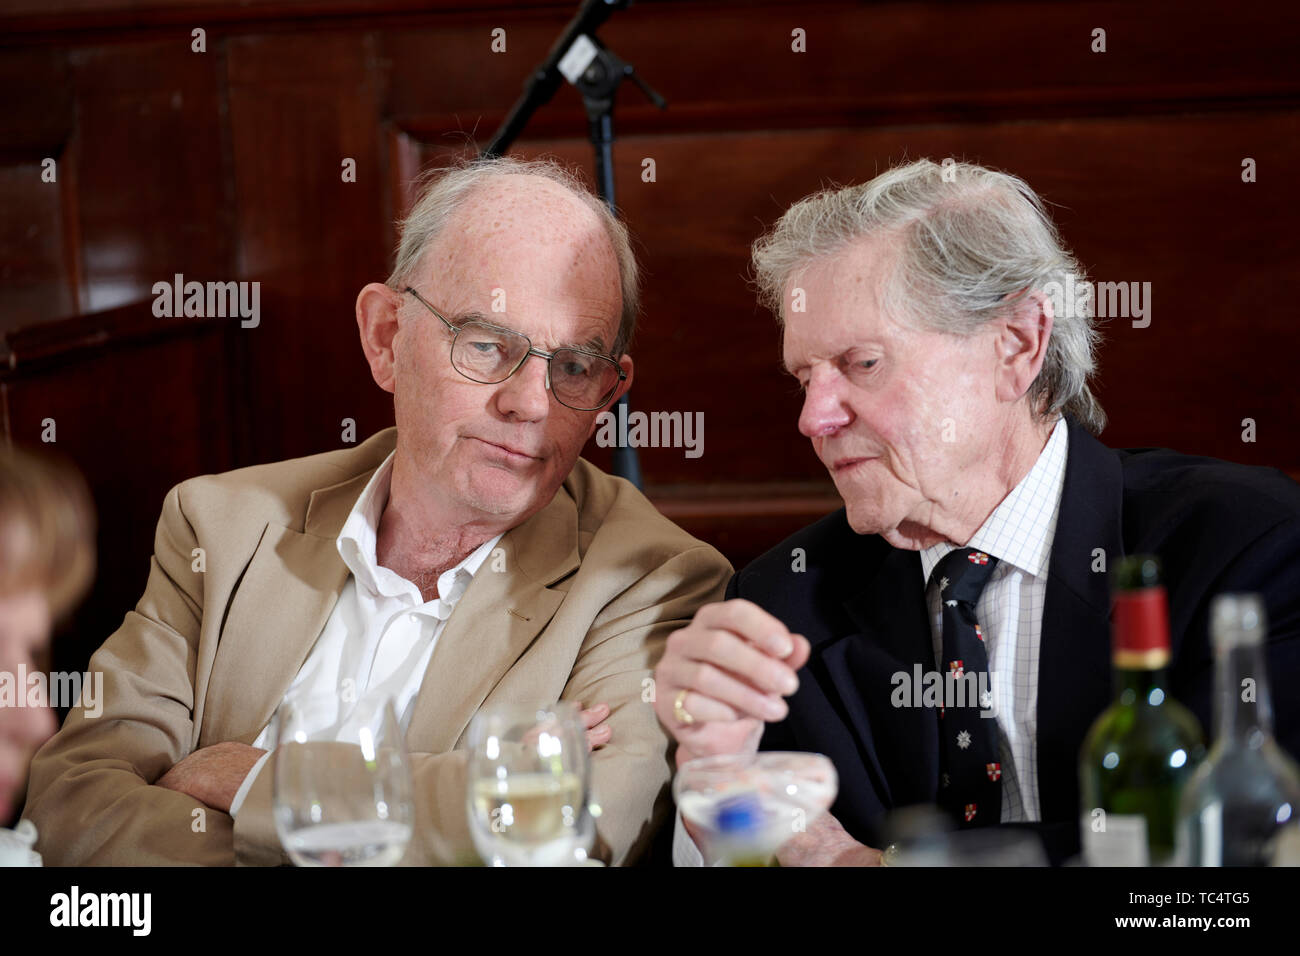 Chris Mullin & Michael Liddiard at The Oldie Literary Lunch 04/06/19 Stock Photo